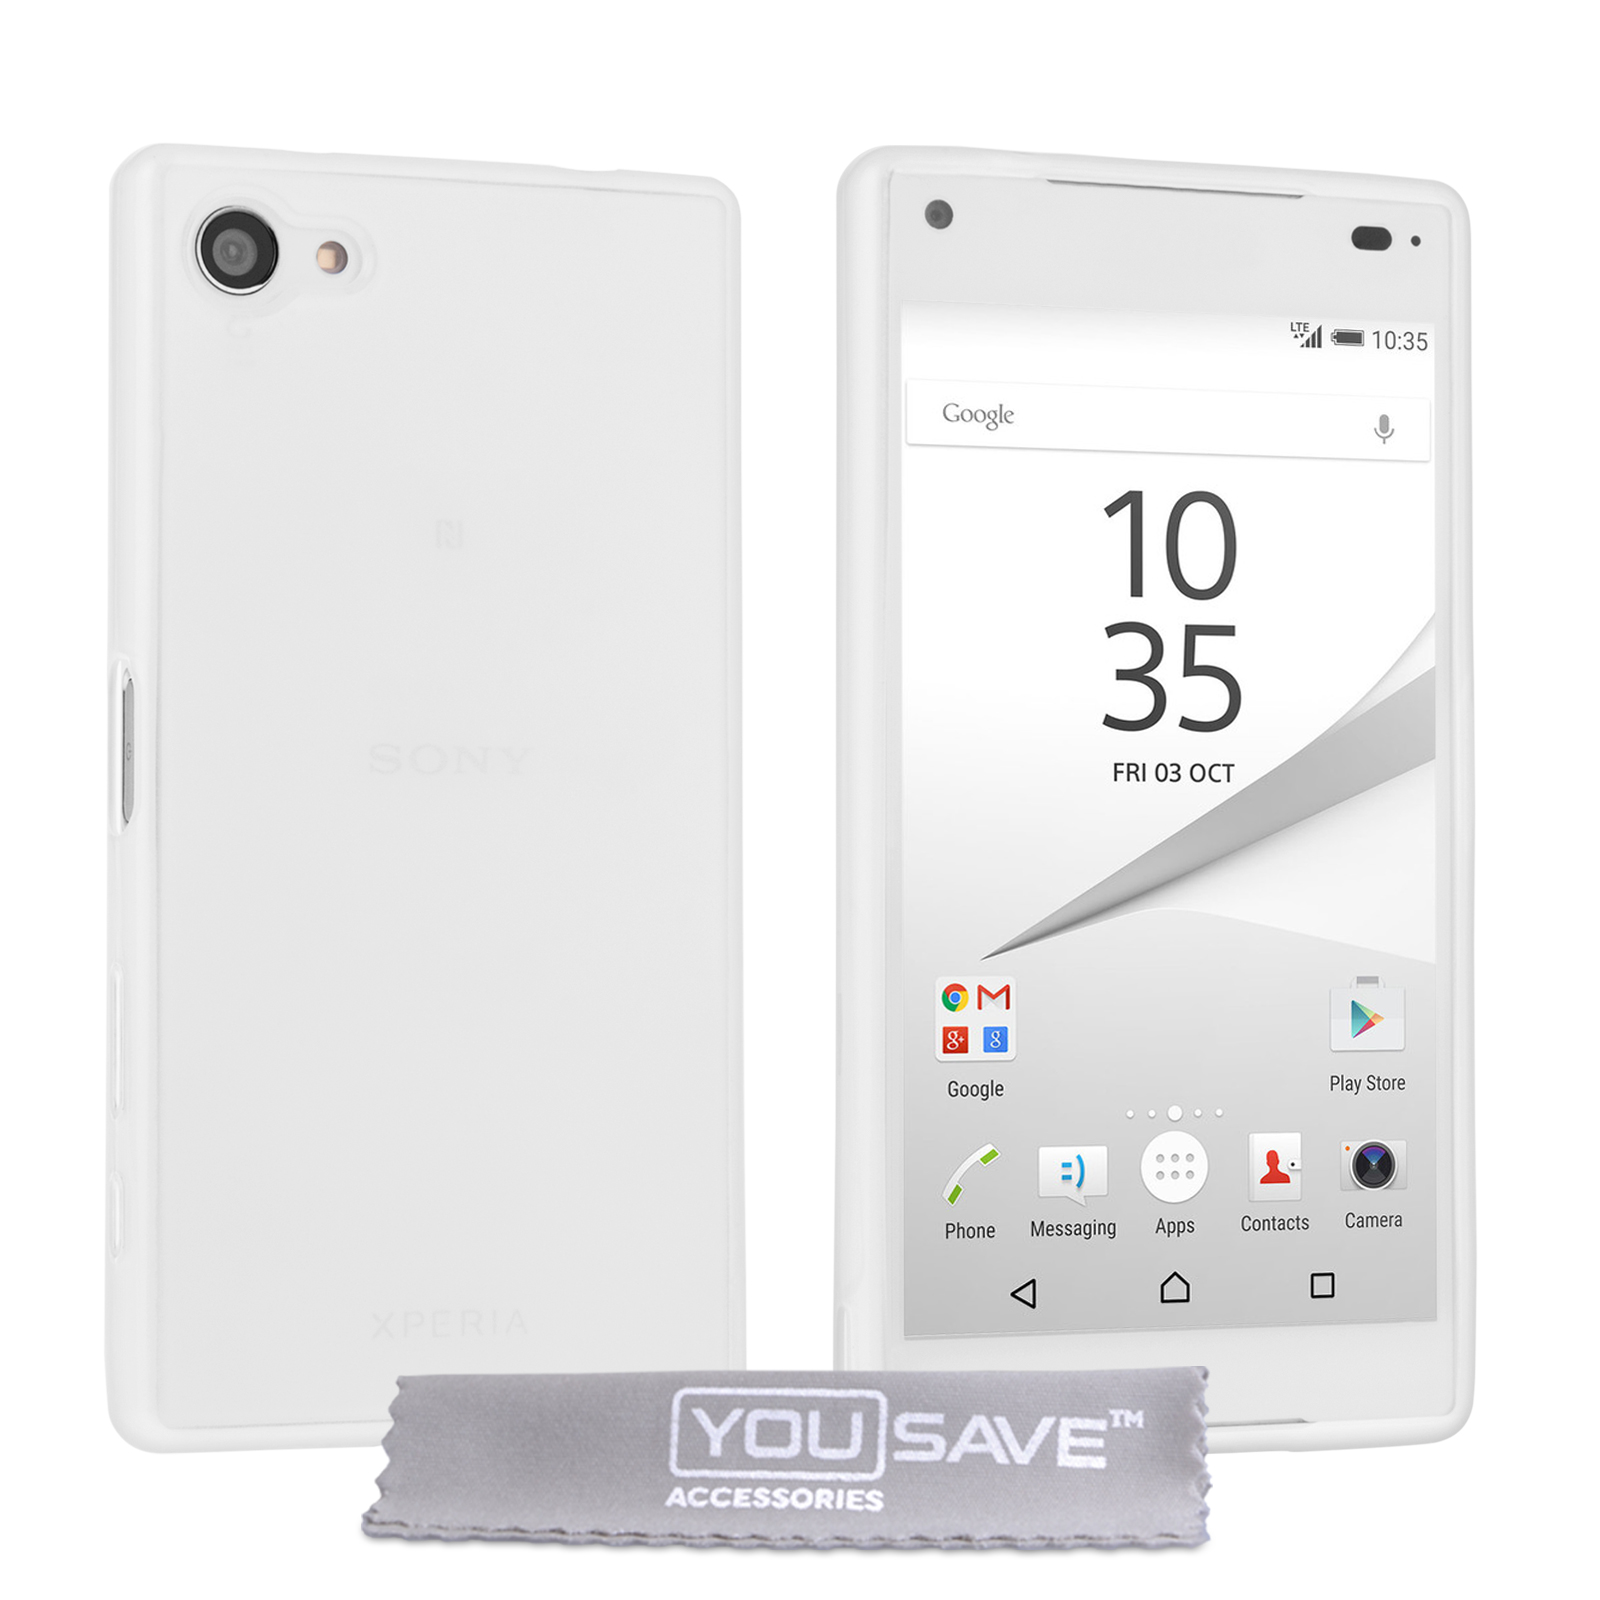 Yousave Accessories Sony Xperia Z5 Compact 0.6mm Ultra-Thin Clear Gel Case